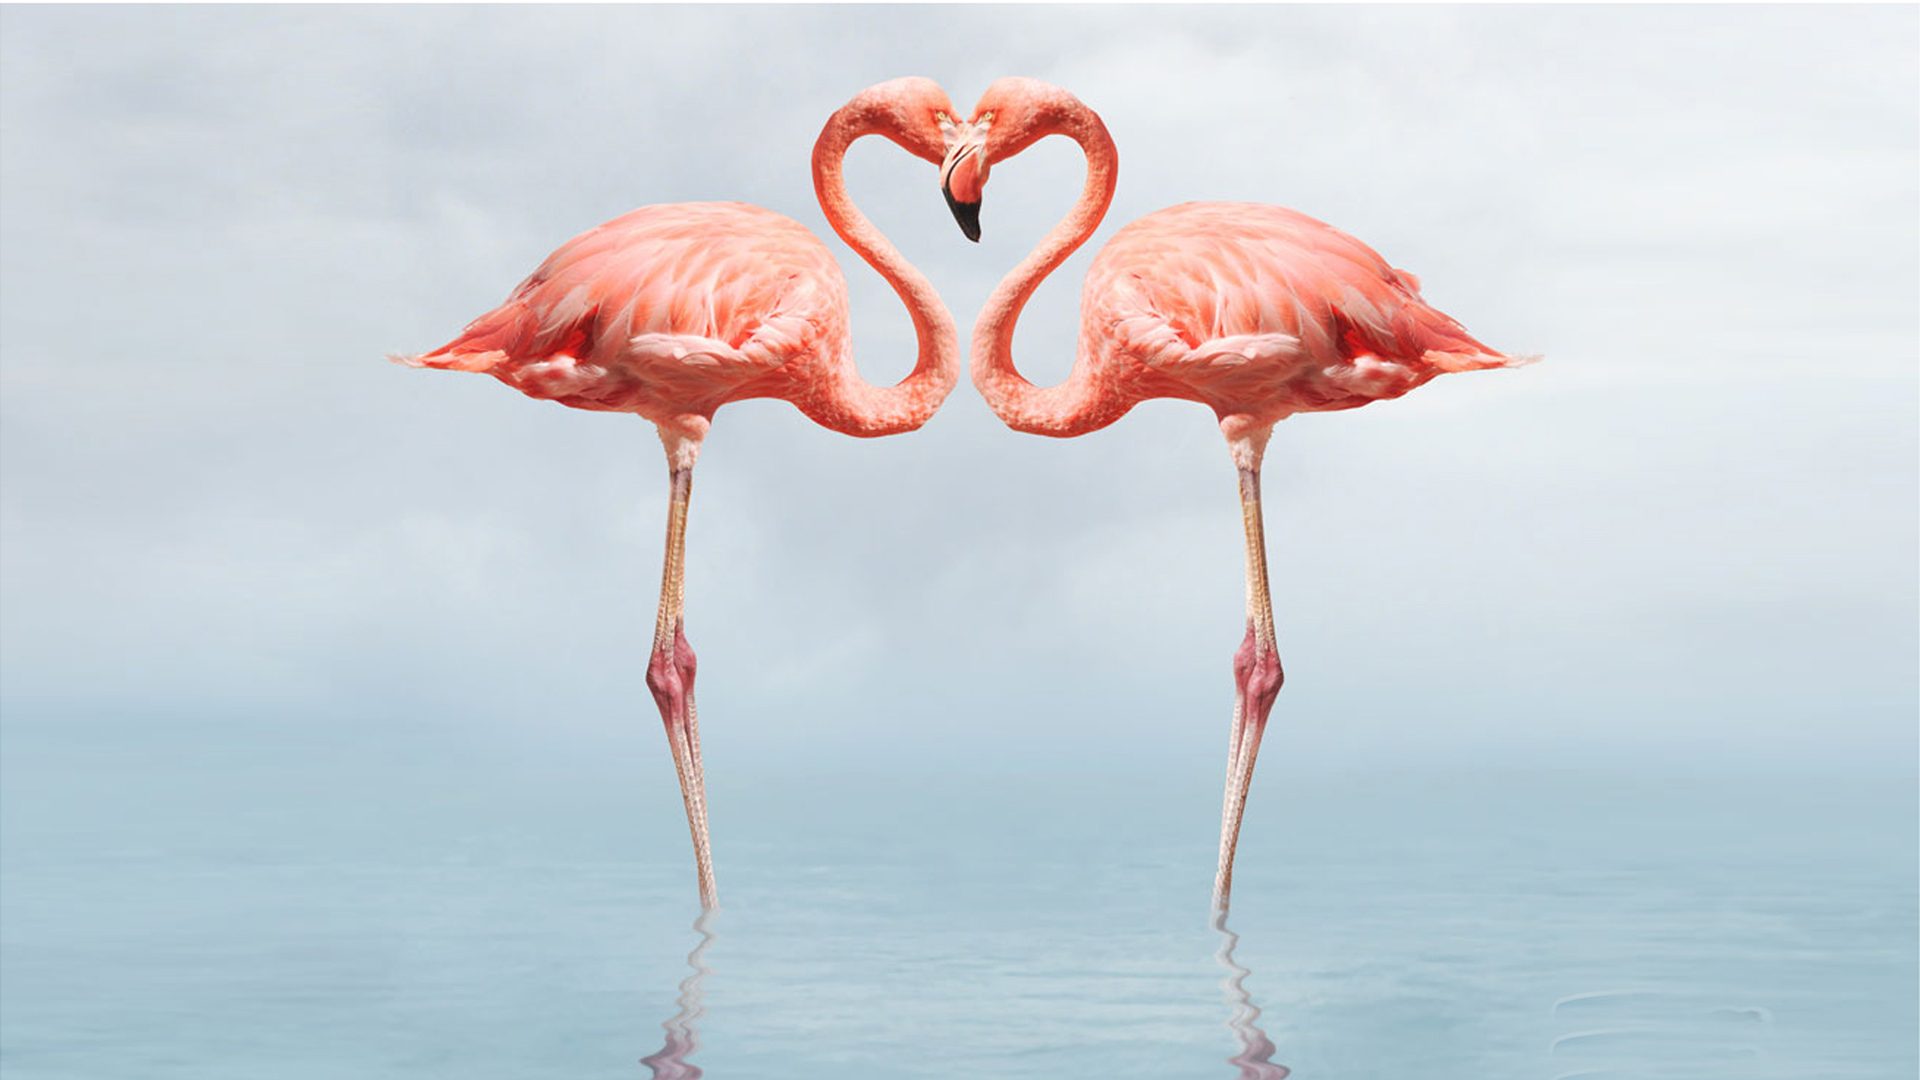 Free download Flamingo Full Hd Wallpapers 1080p Wallpapers13com [1920x1080] for your Desktop